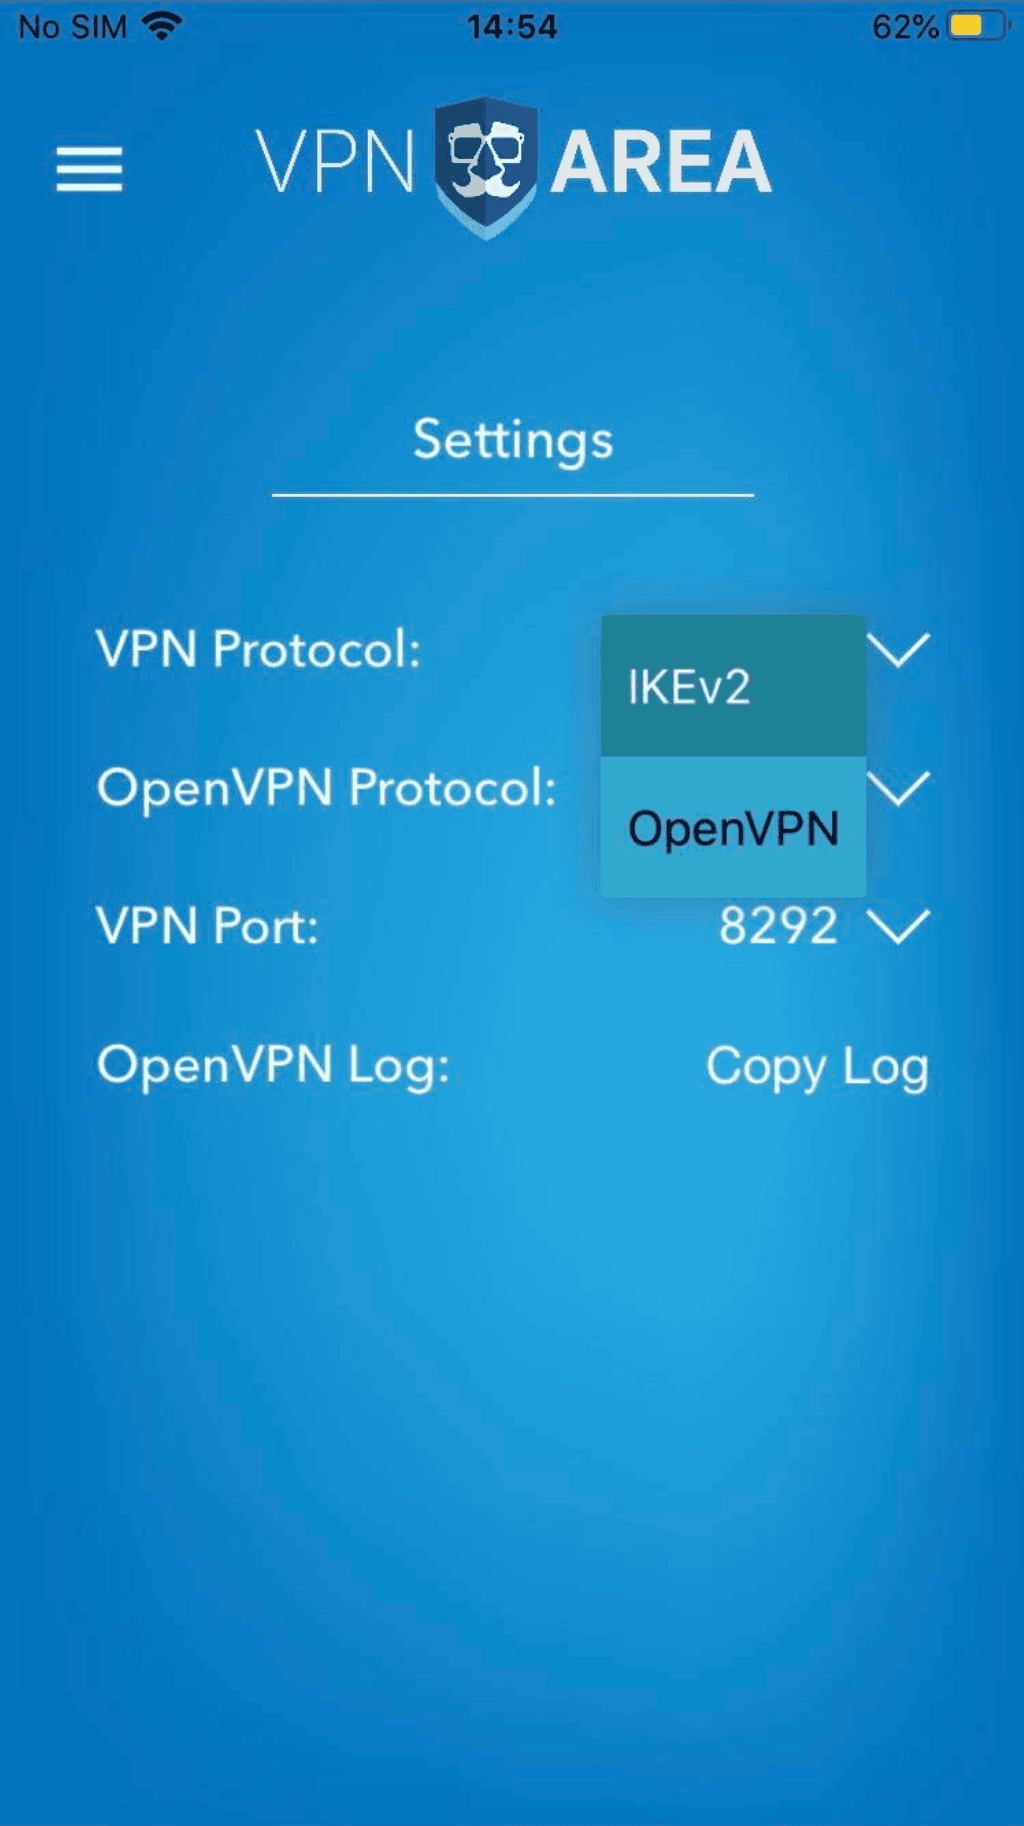 Screenshot of VPNArea's iOS client settings page, showing the option to switch between IKEv2 and OpenVPN.